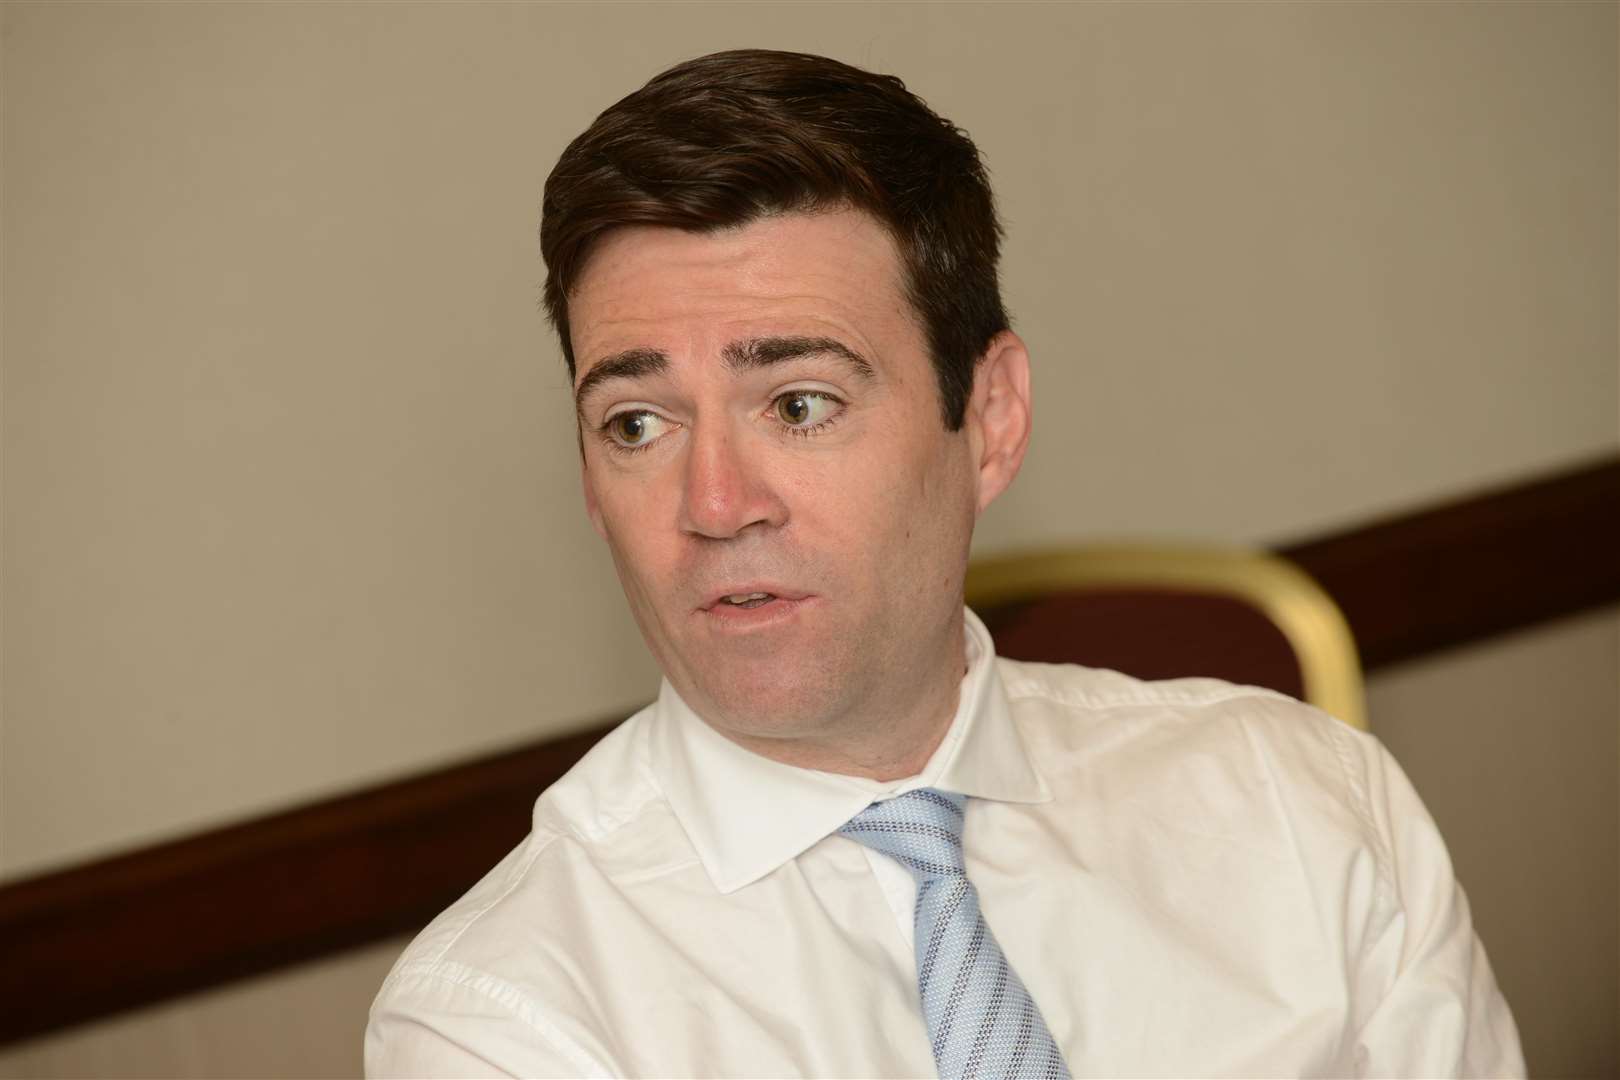 Andy Burnham described it as a "criminal cover-up on an industrial scale"